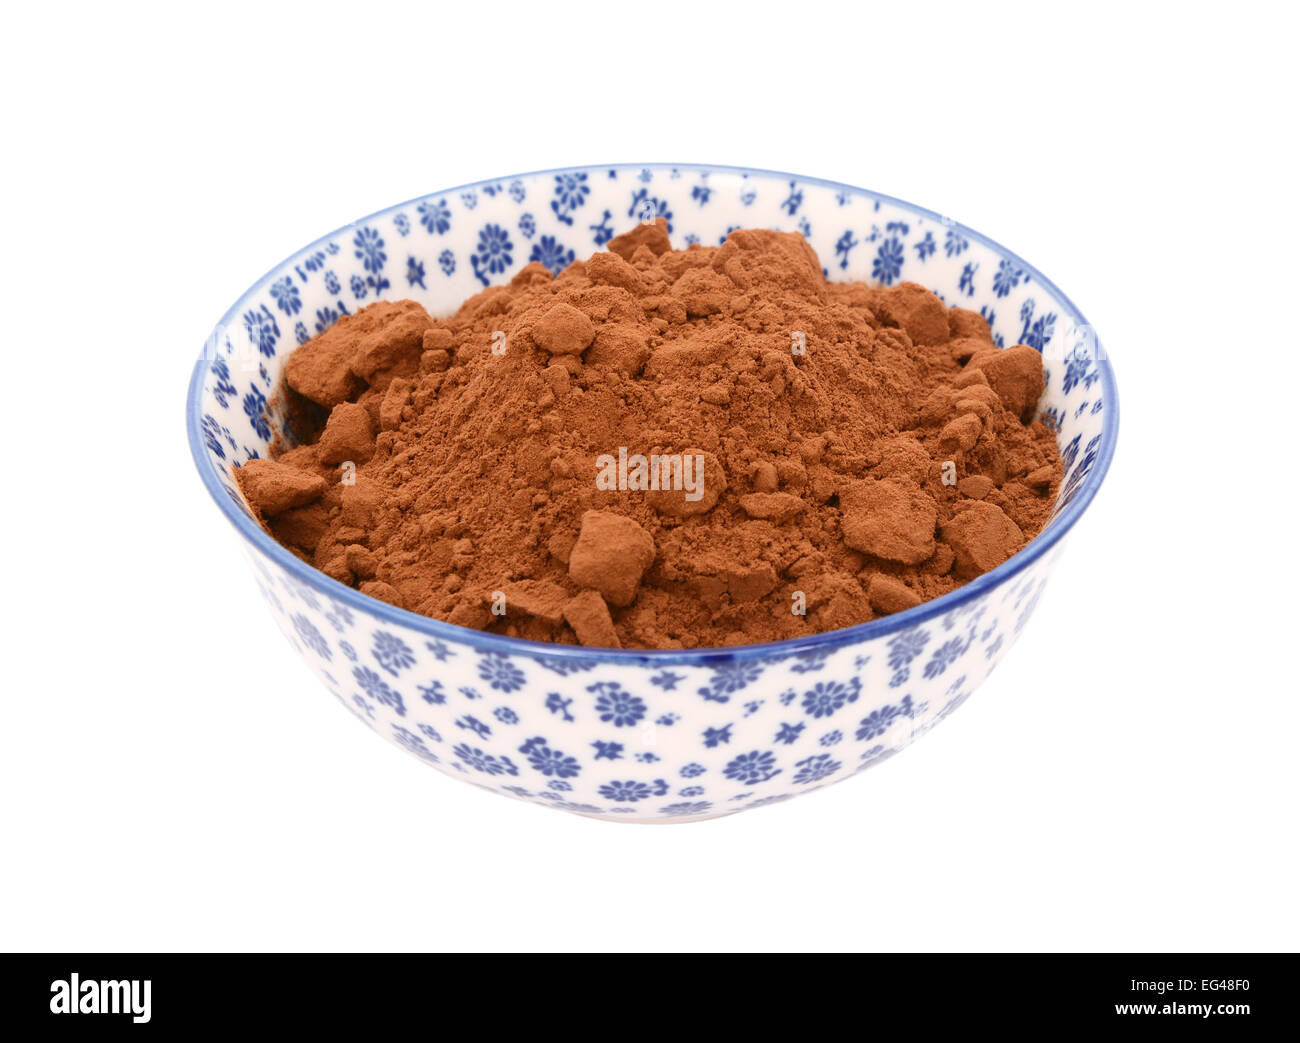 Cocoa powder in a blue and white porcelain bowl with a floral design, isolated on a white background Stock Photo